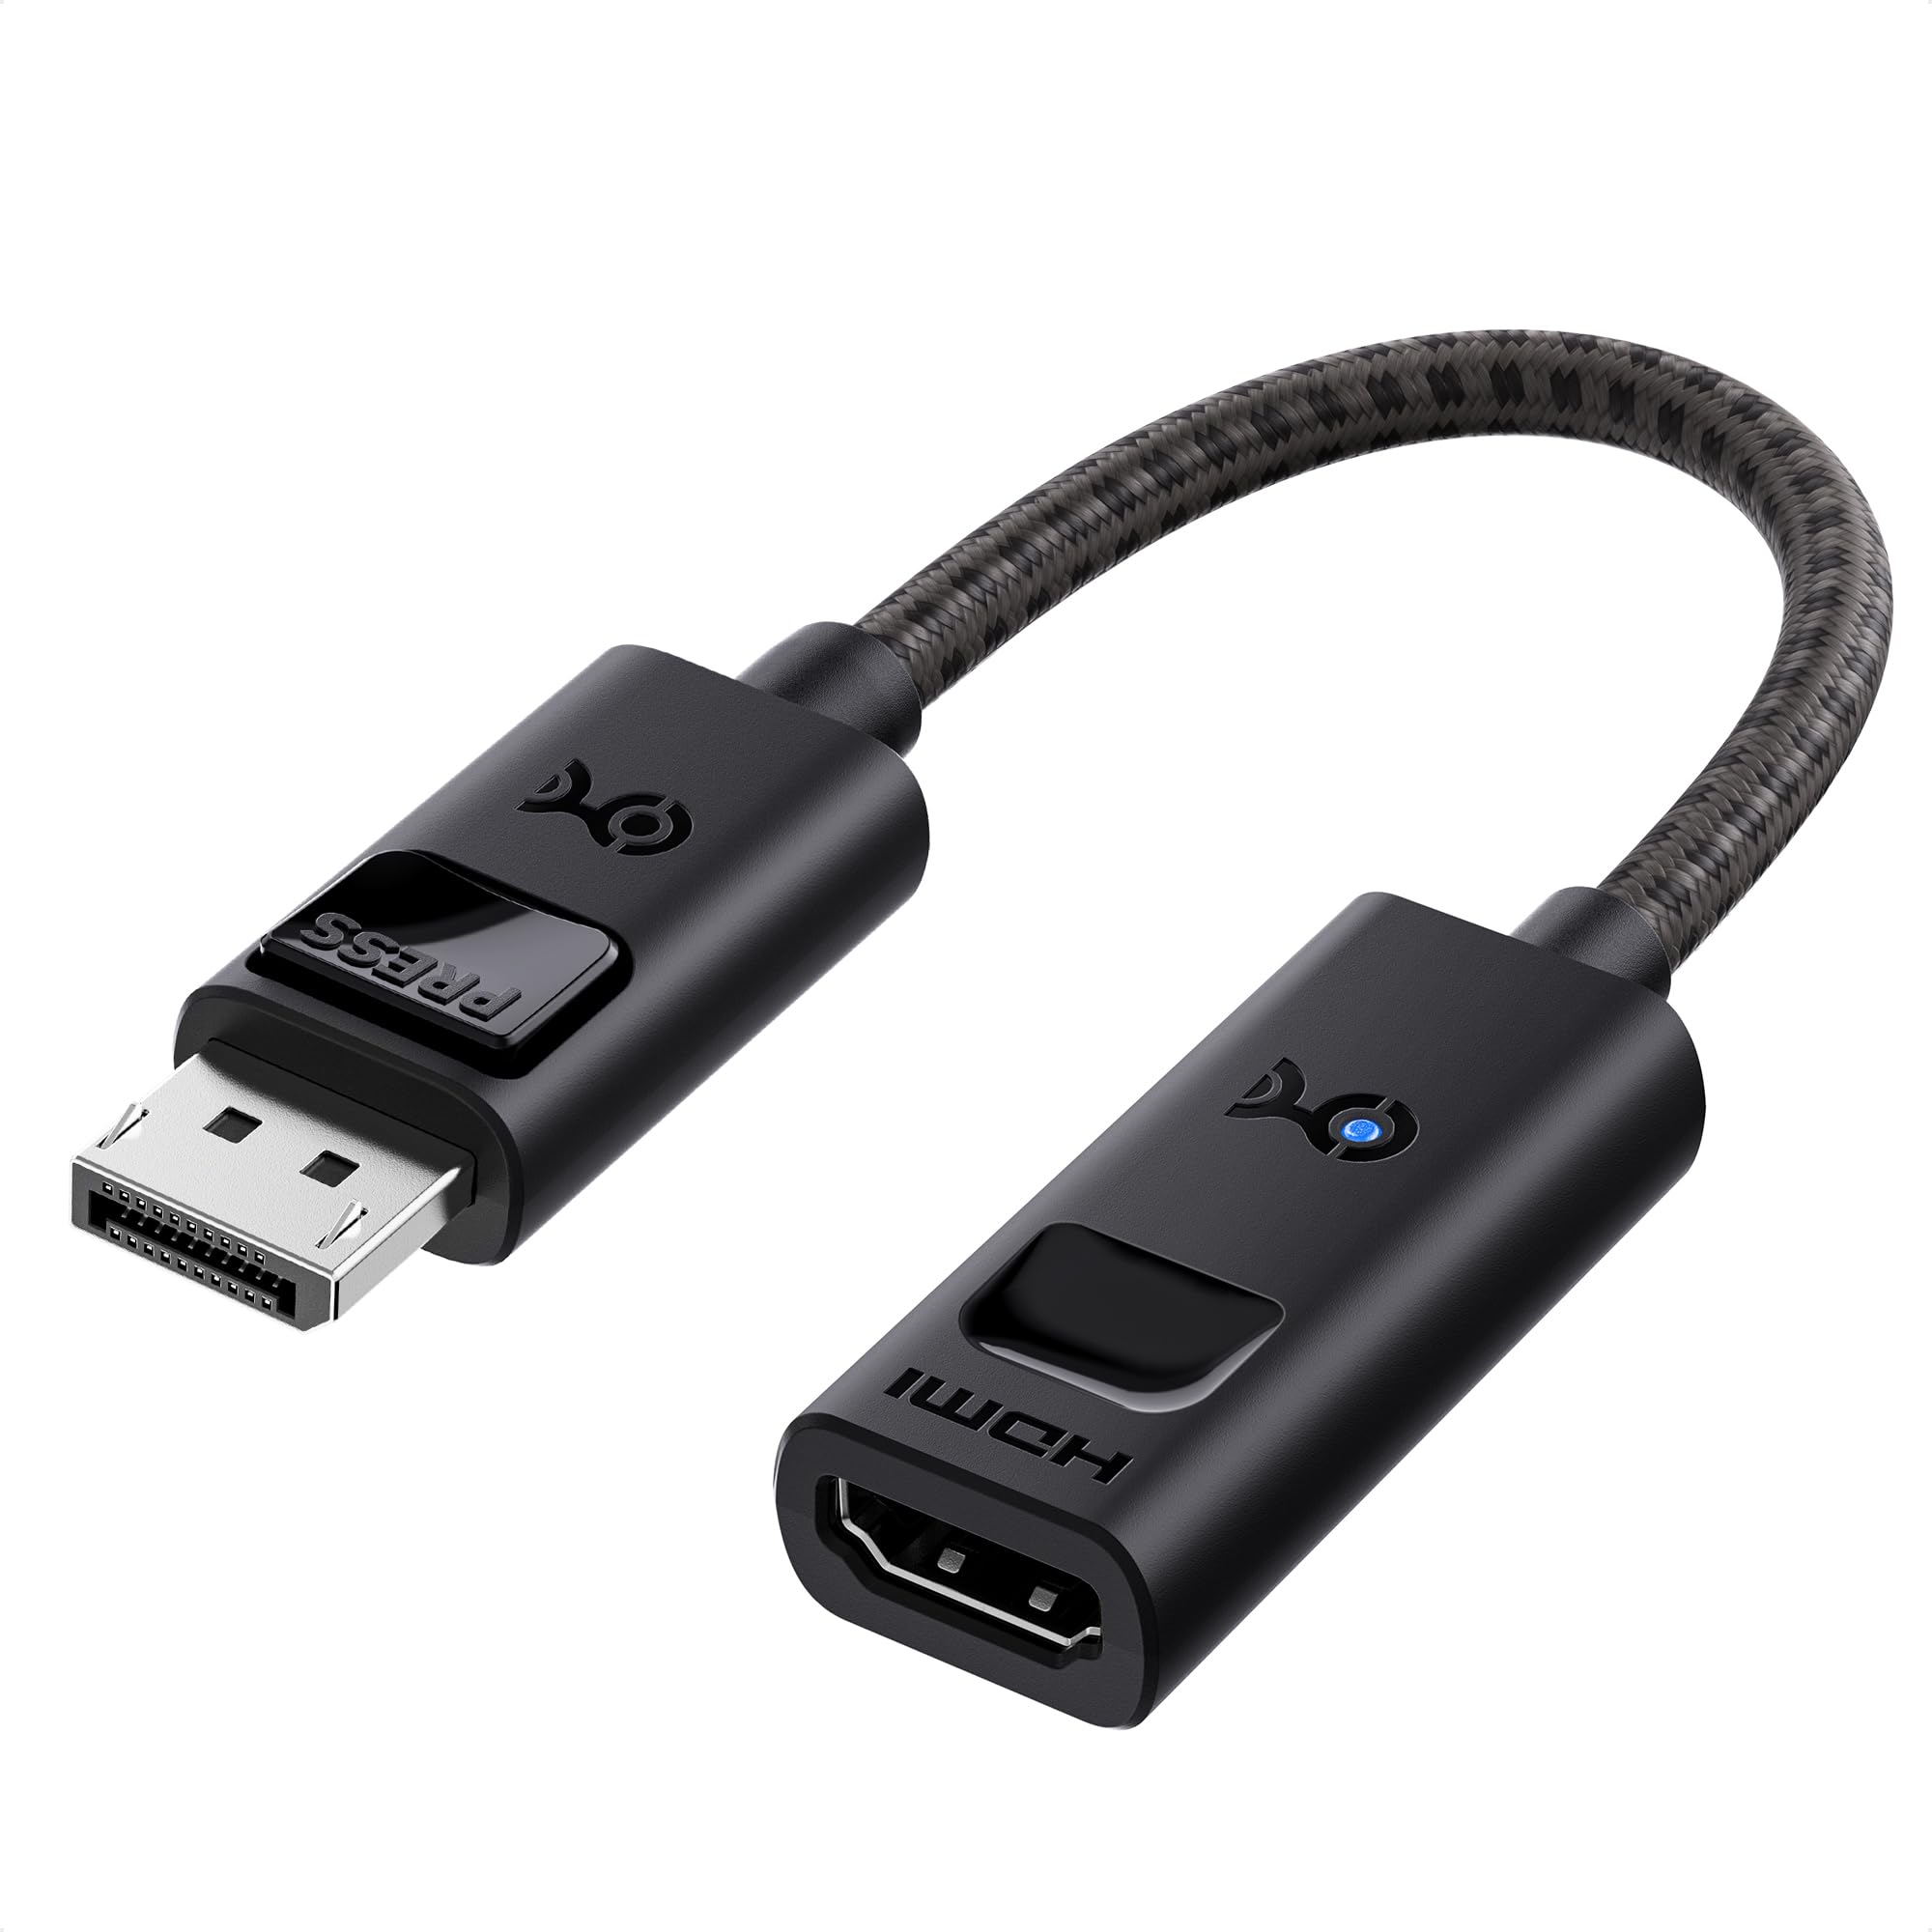 HDMI cable and adapters